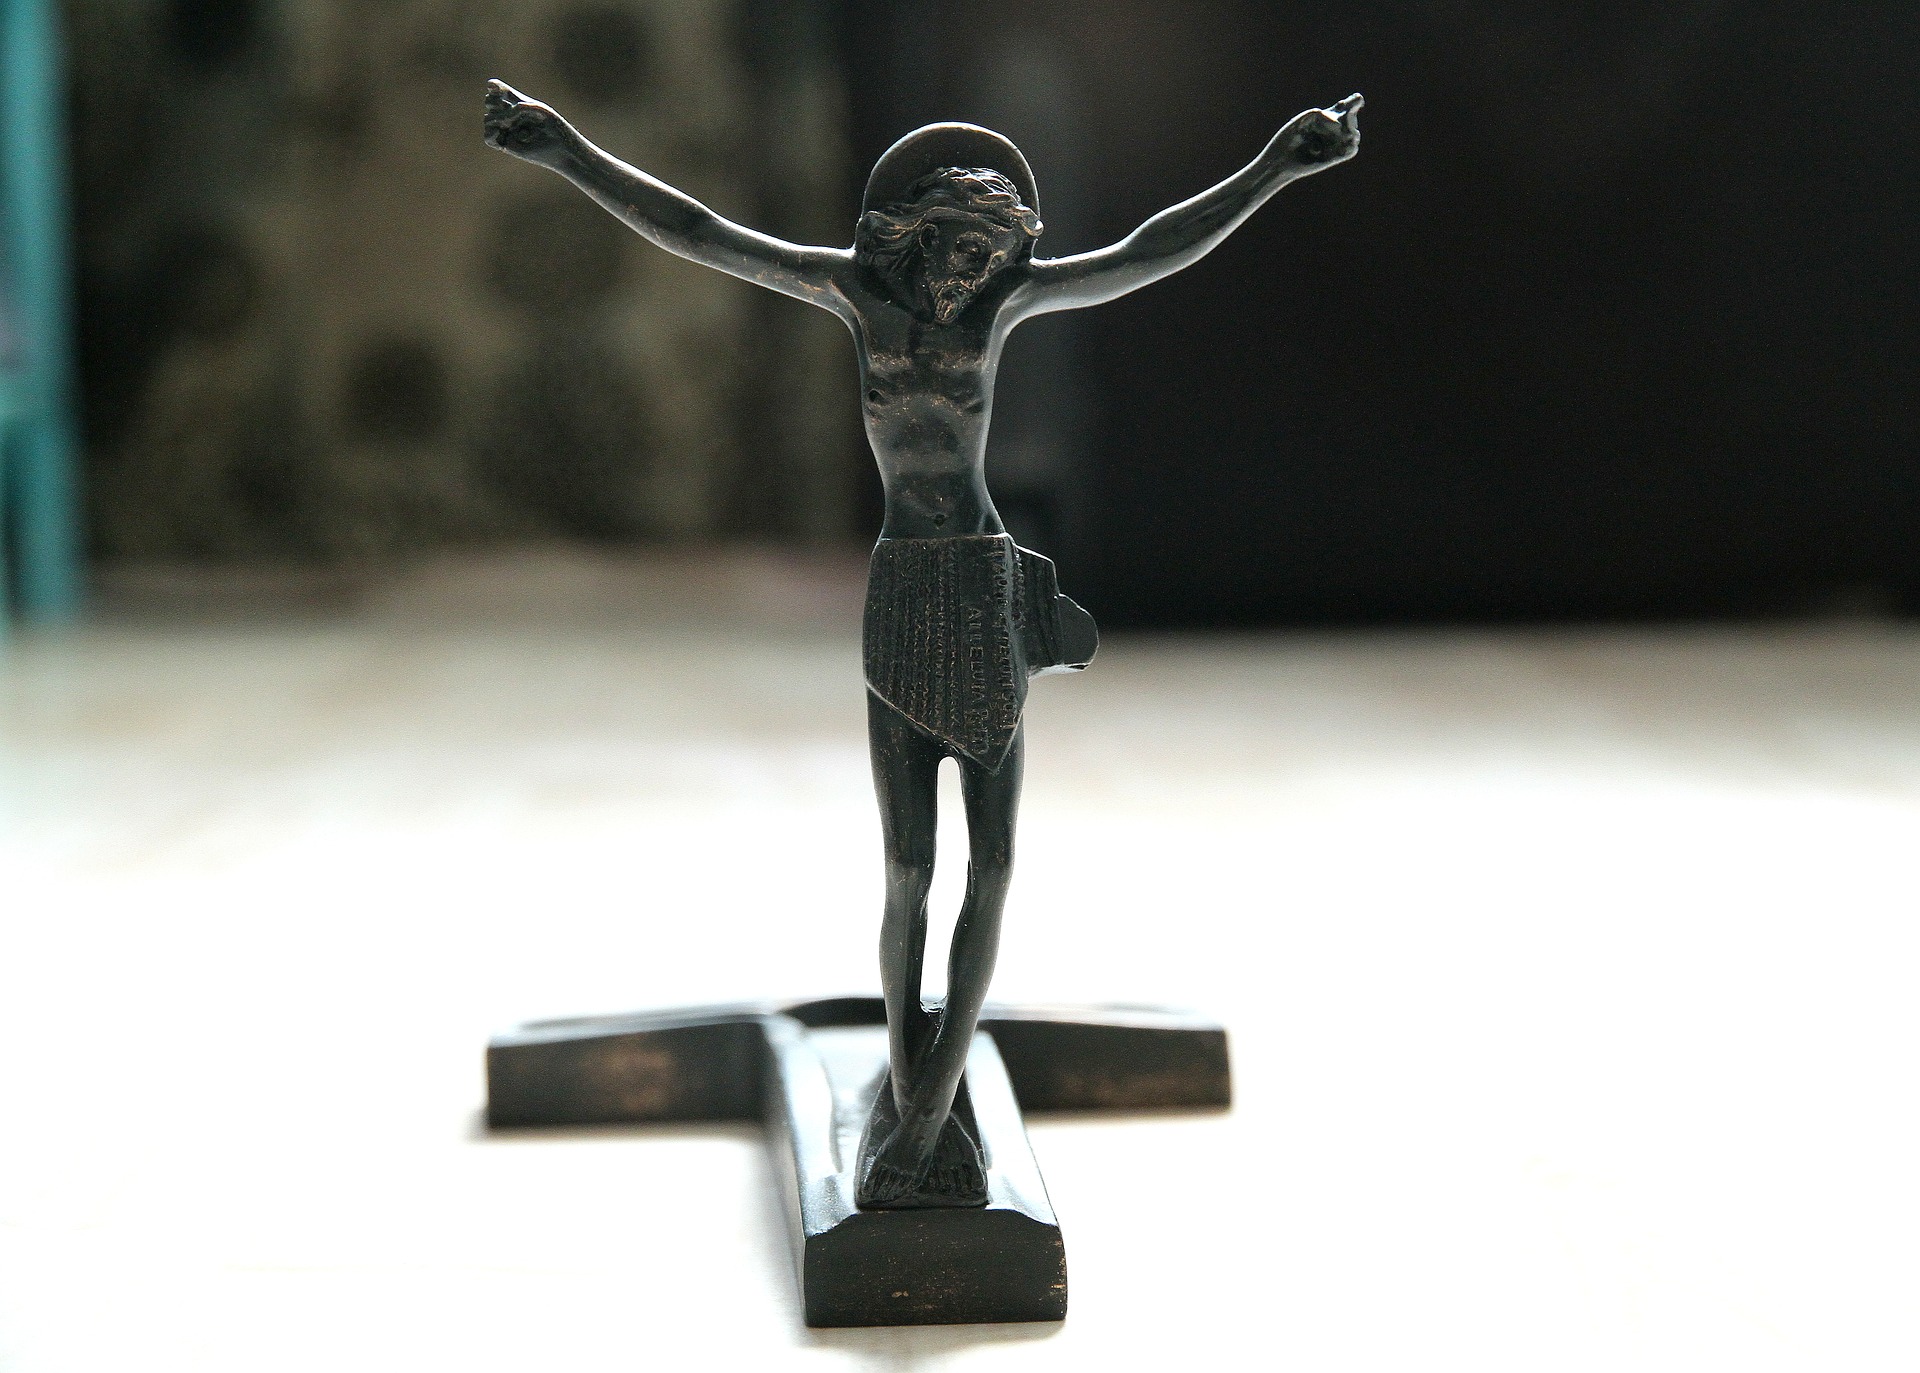 Statue of the Risen Christ, with the cross on the ground behind him at his feet.